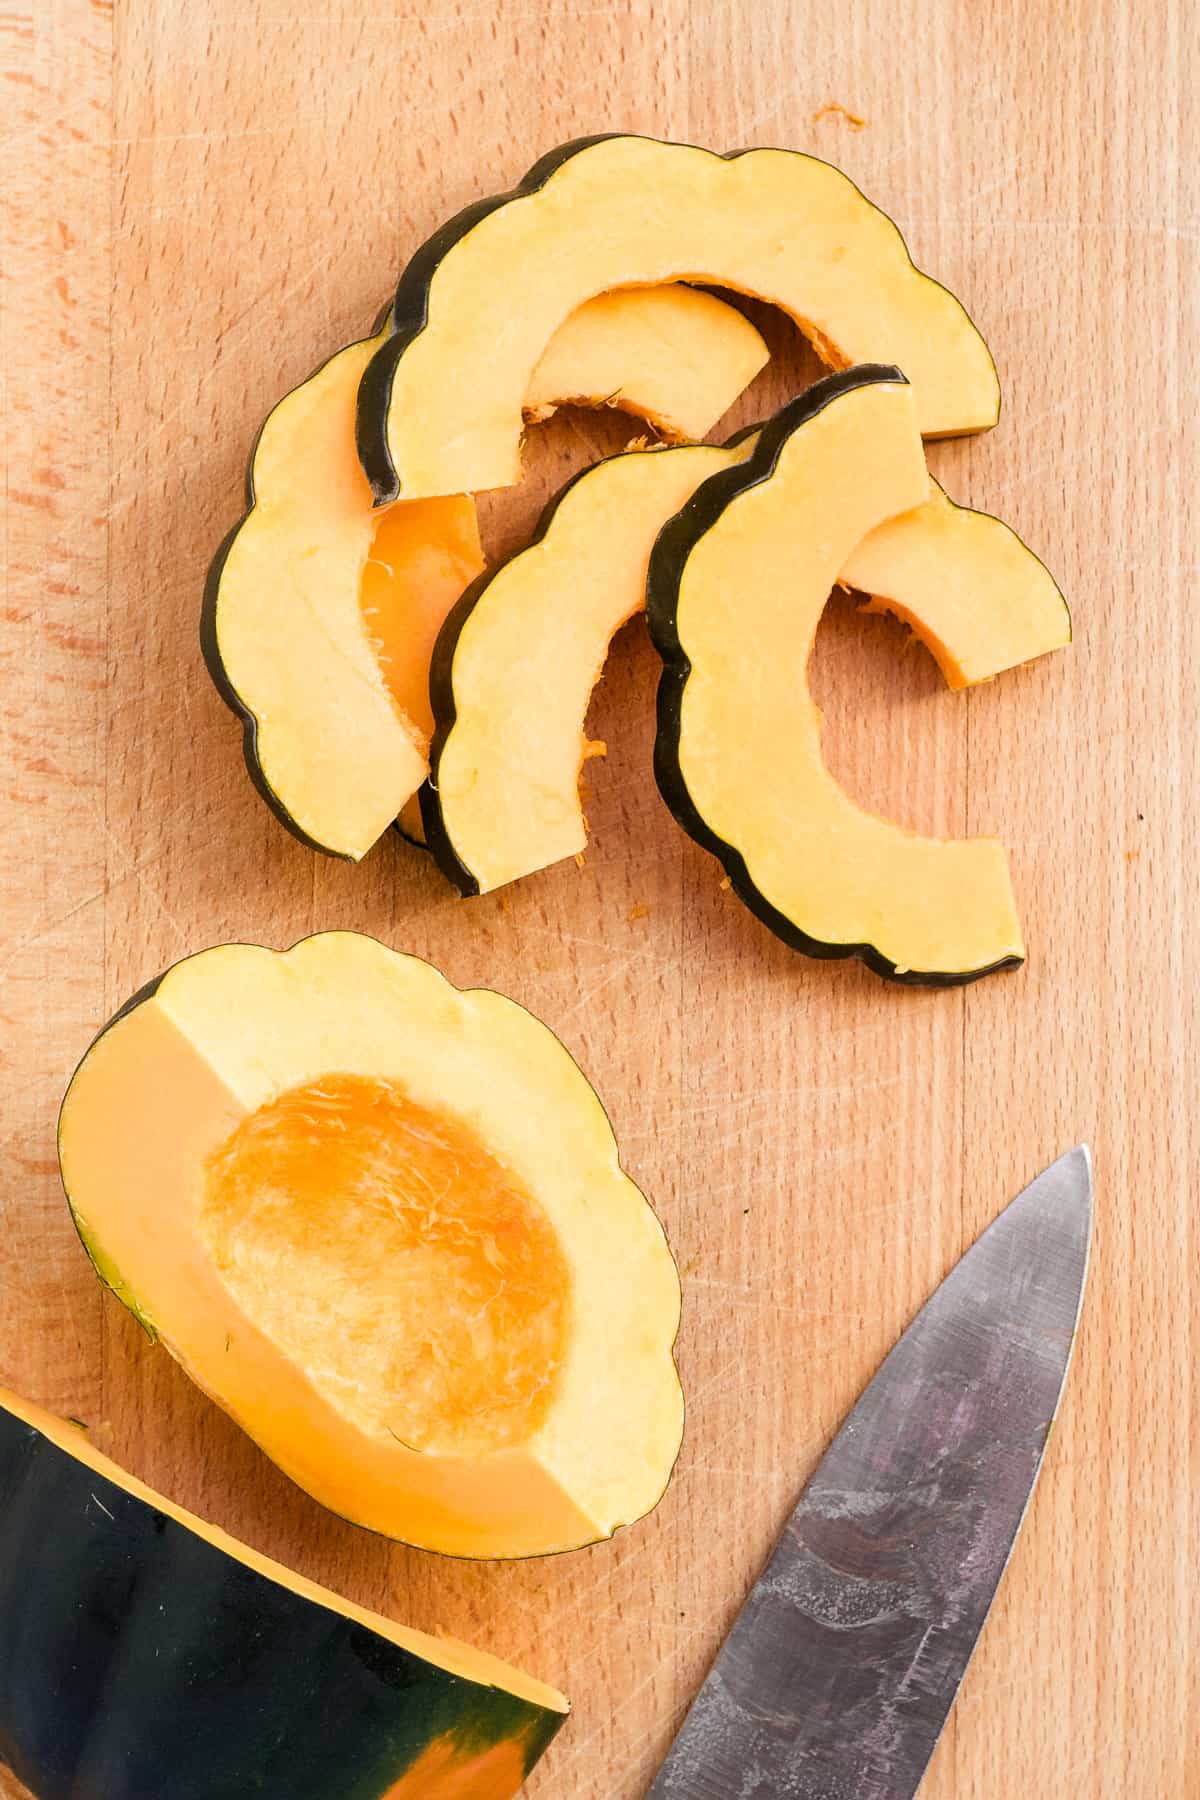 Squash cut into slices with large knife on cutting board